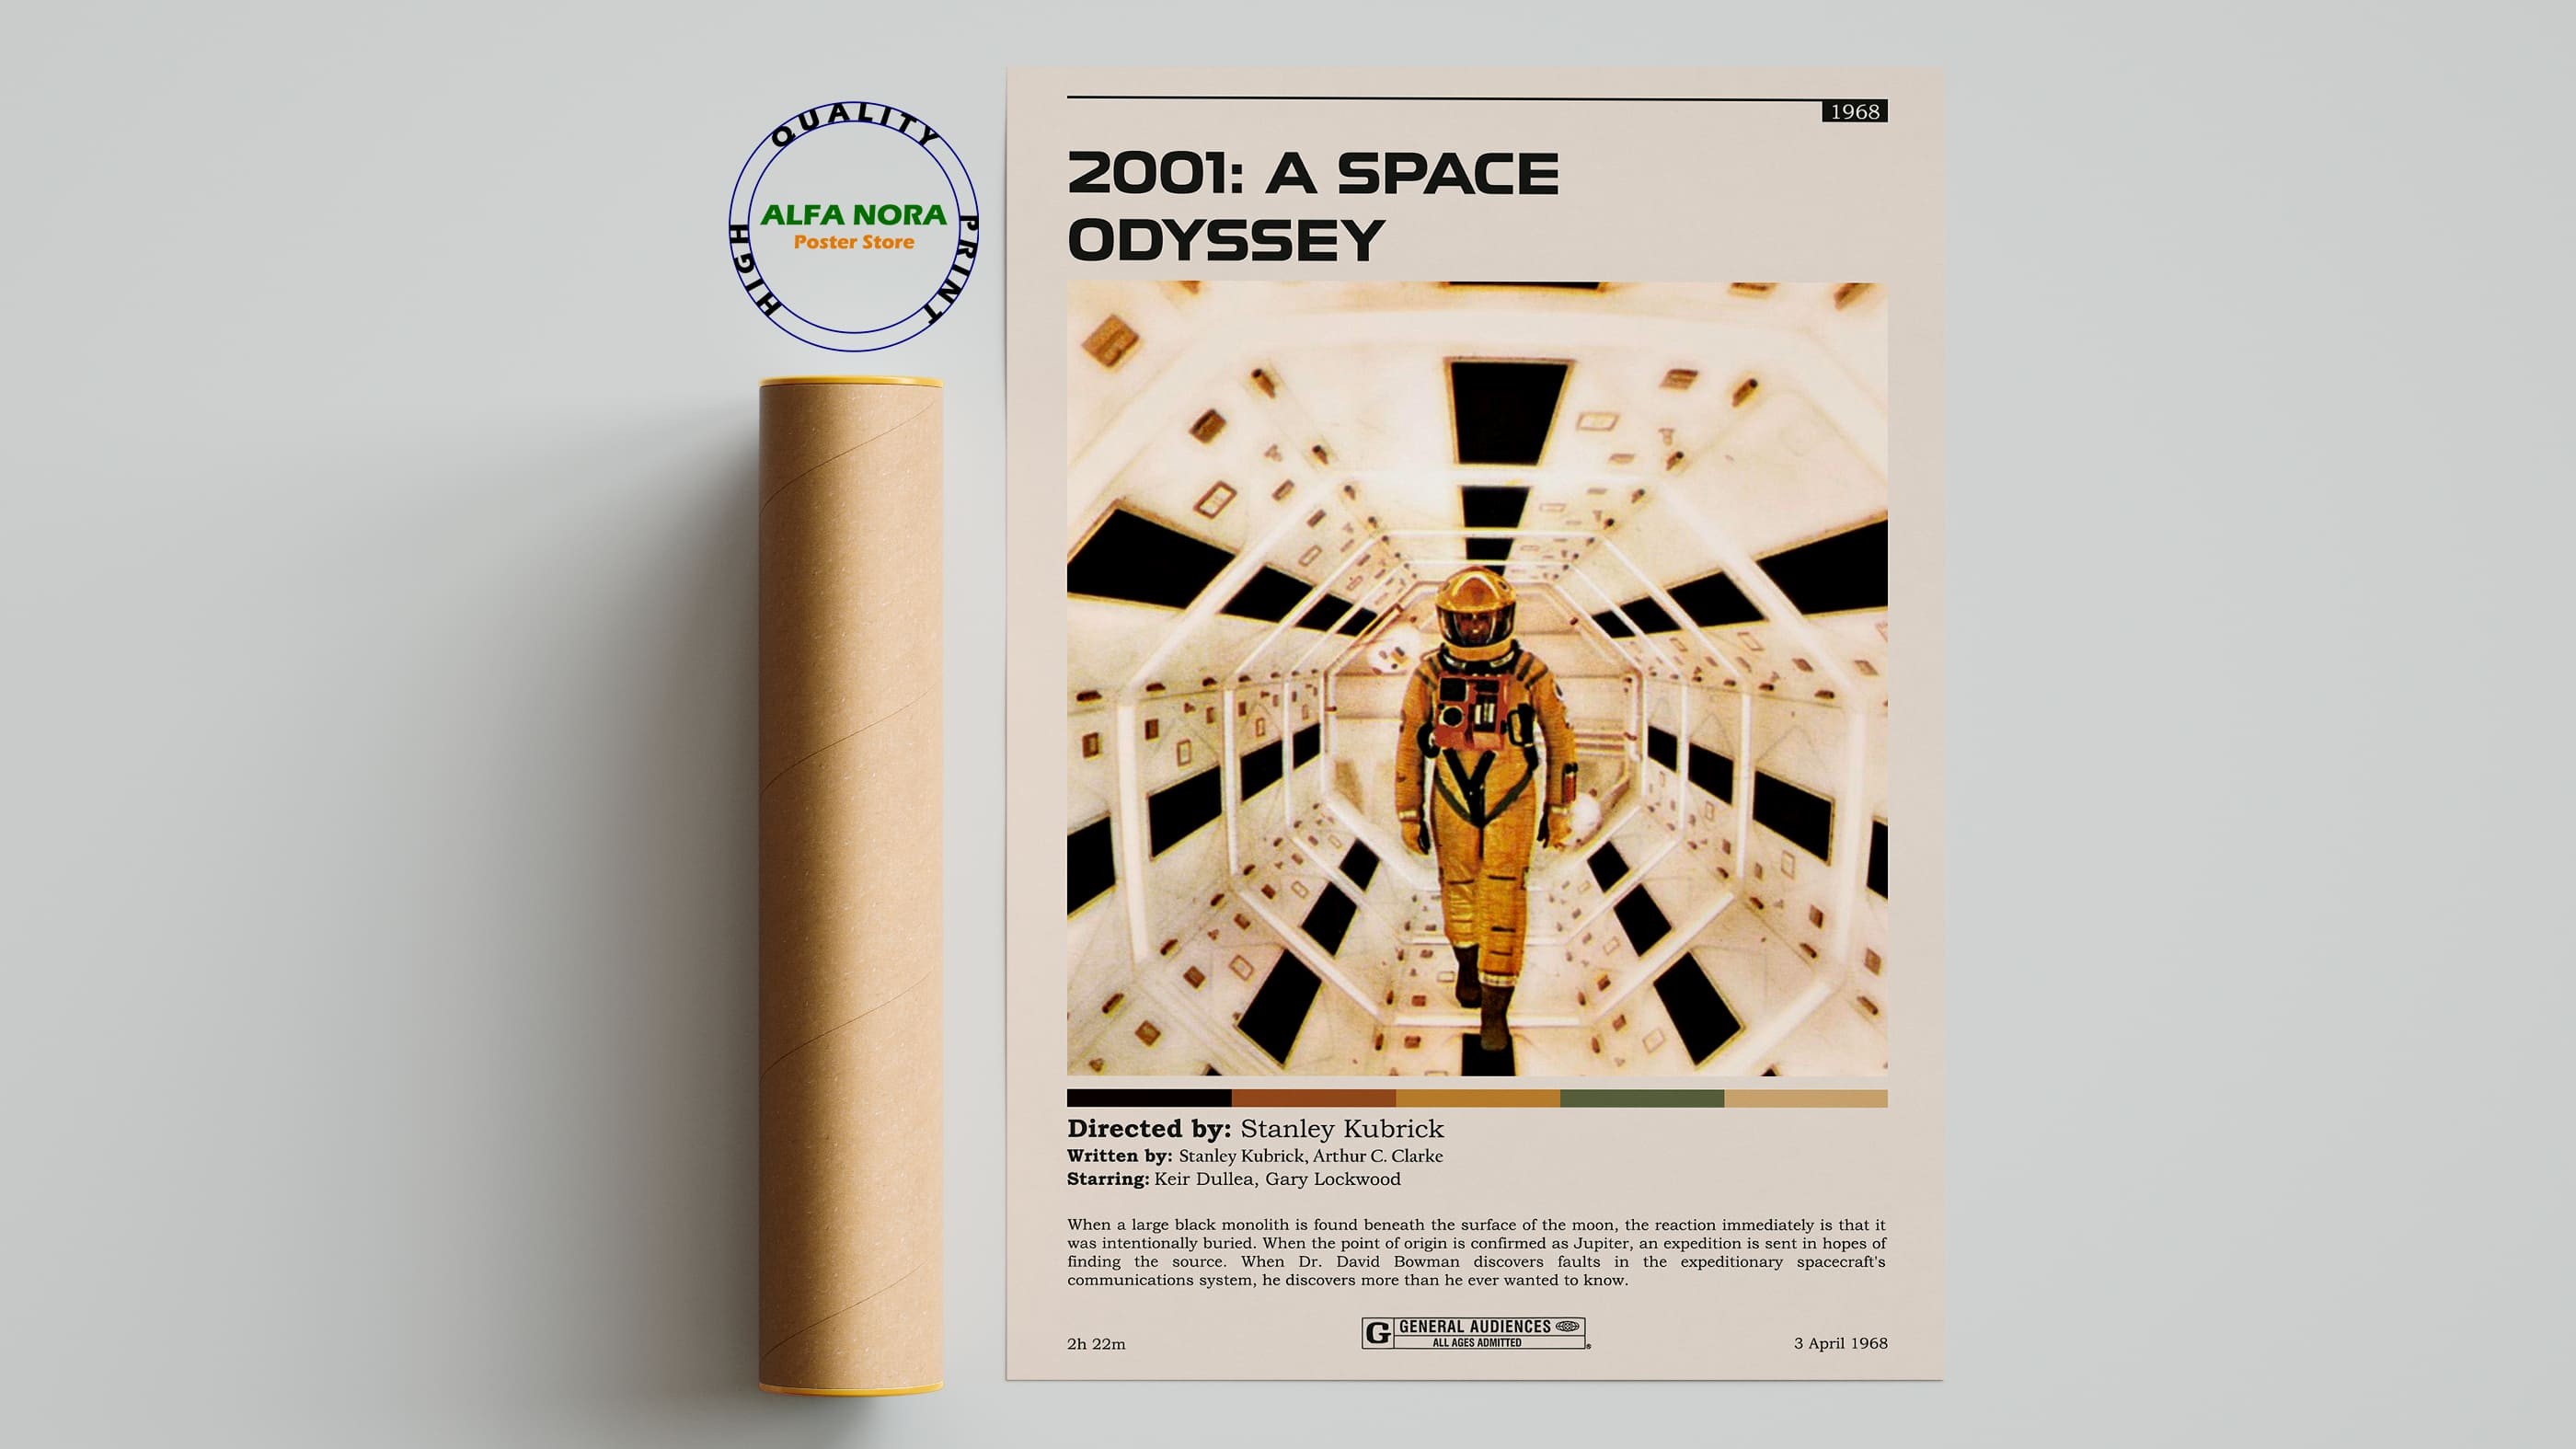 2001: A Space Odyssey Print/2001: A Space Odyssey Wall Art/2001: A Space Odyssey Poster